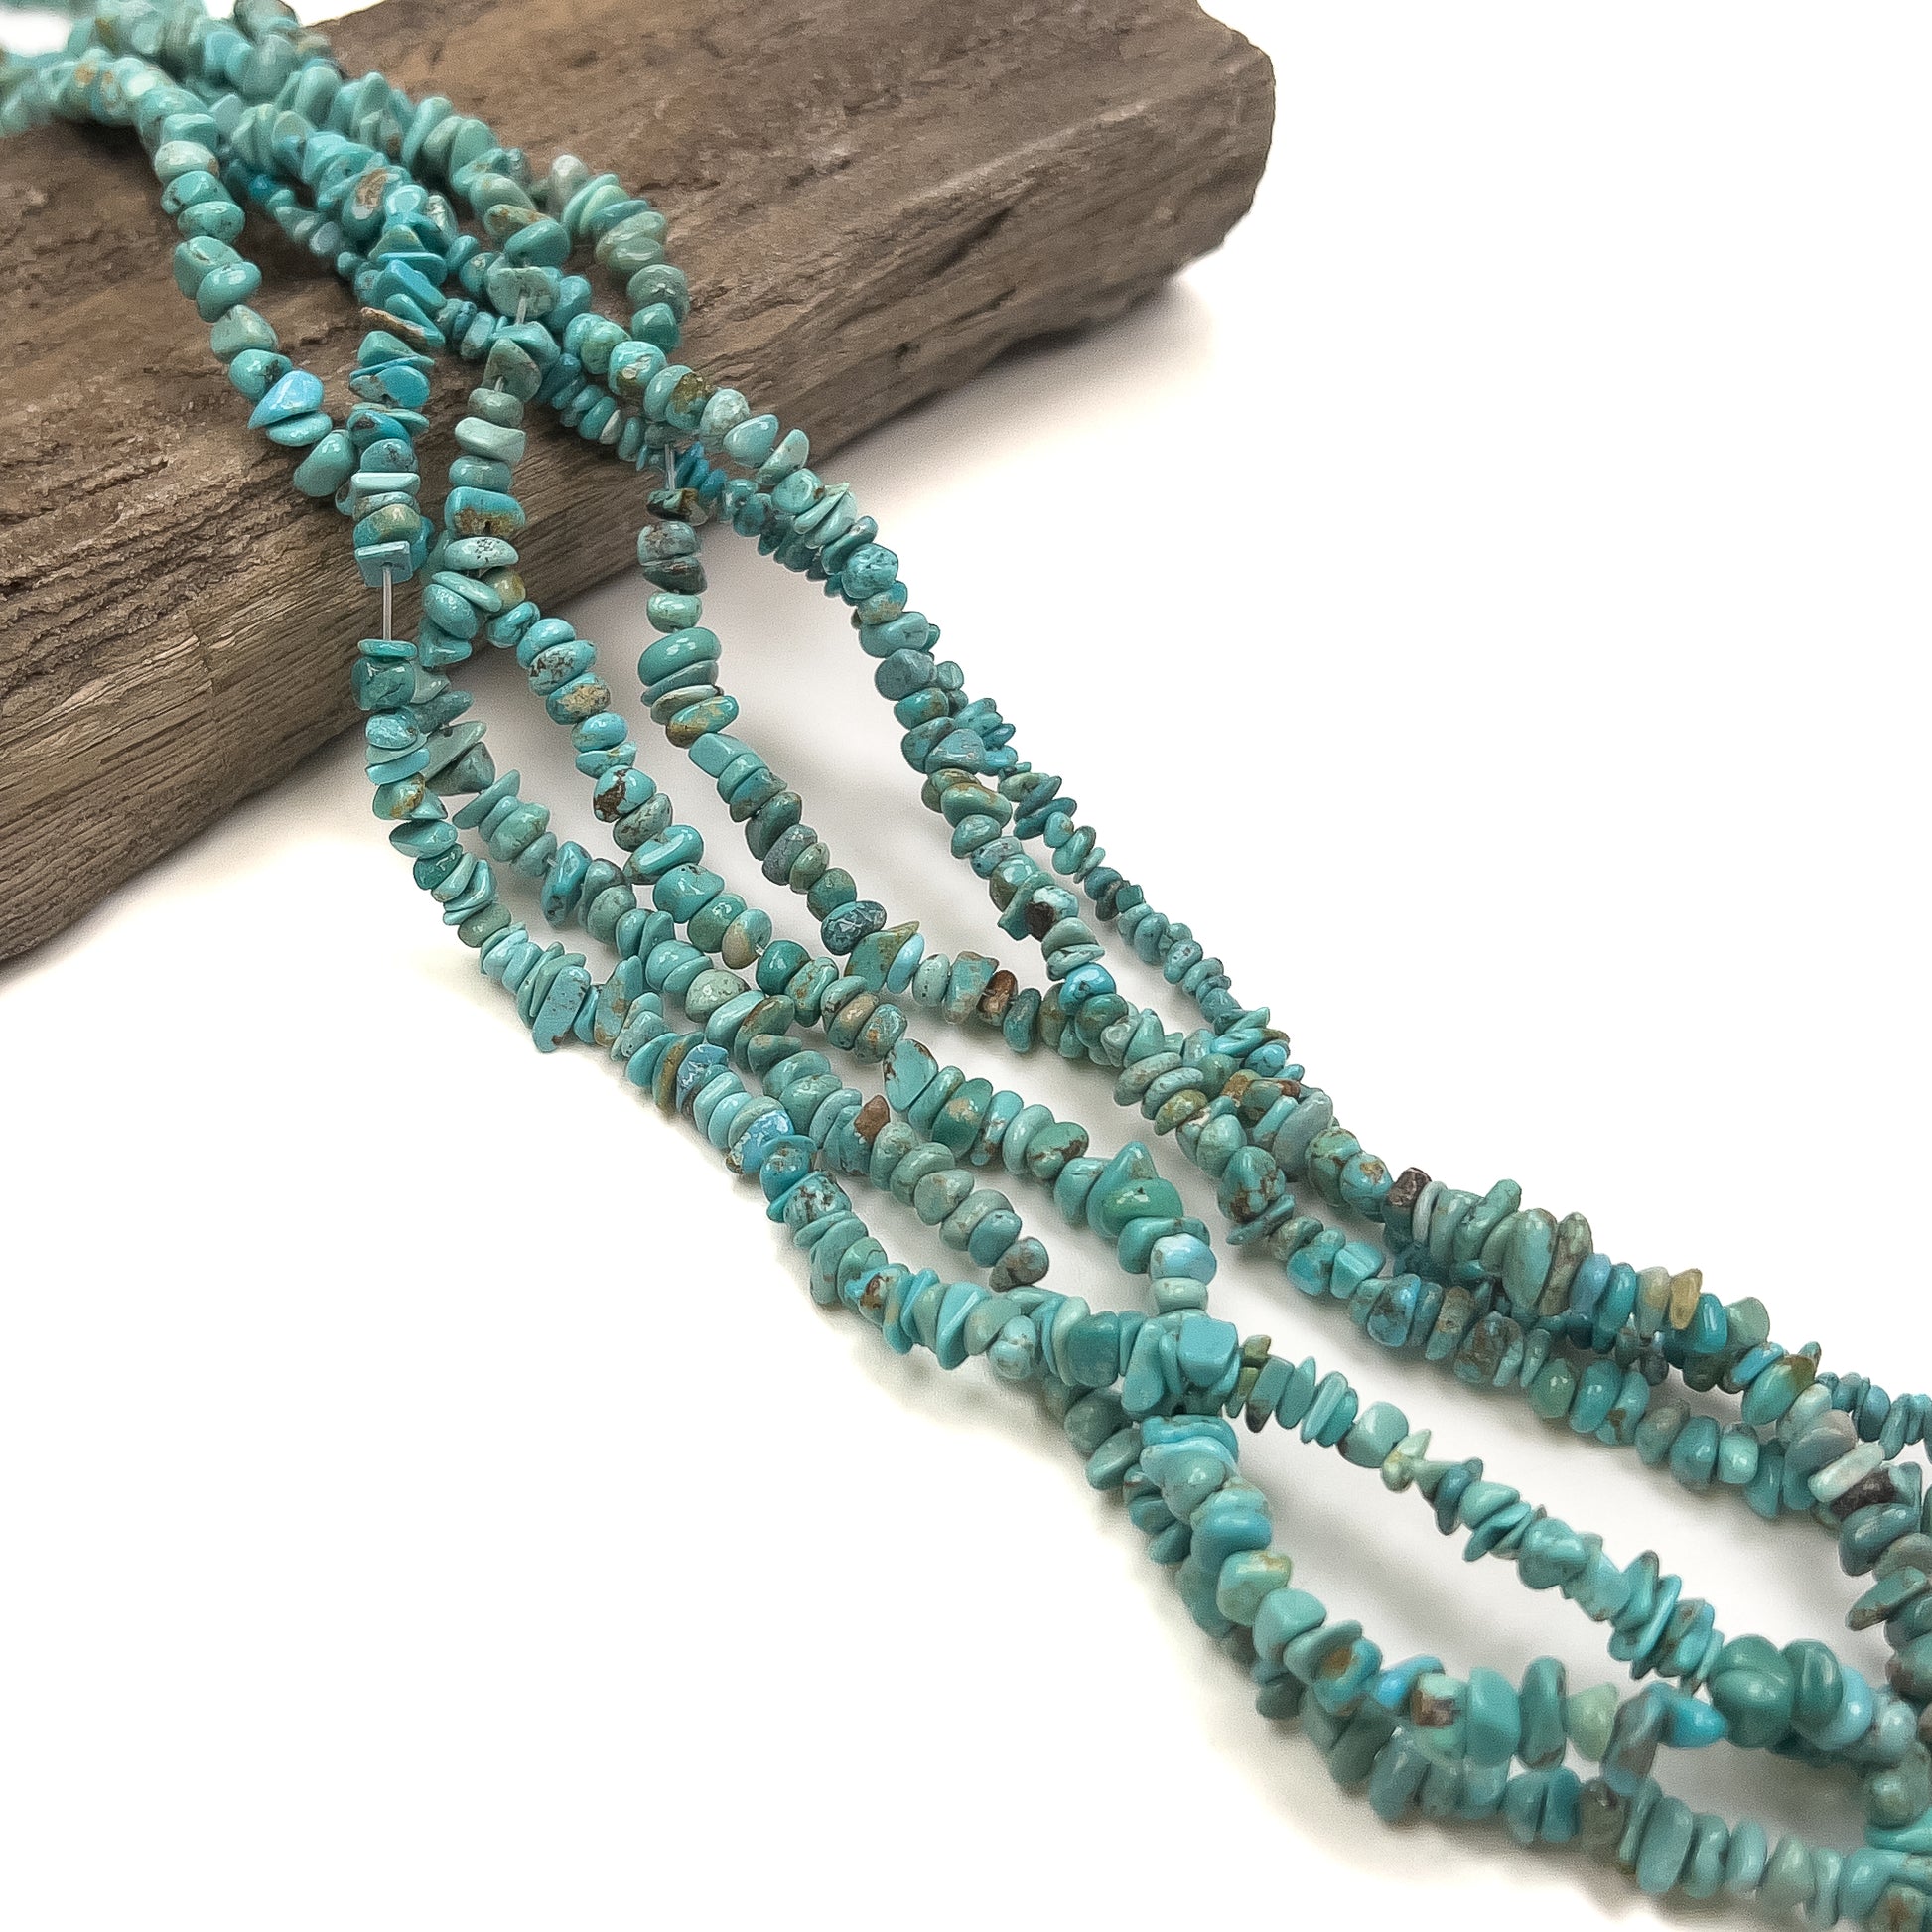 Nevada Turquoise Small Chip Bead - 8" Strand